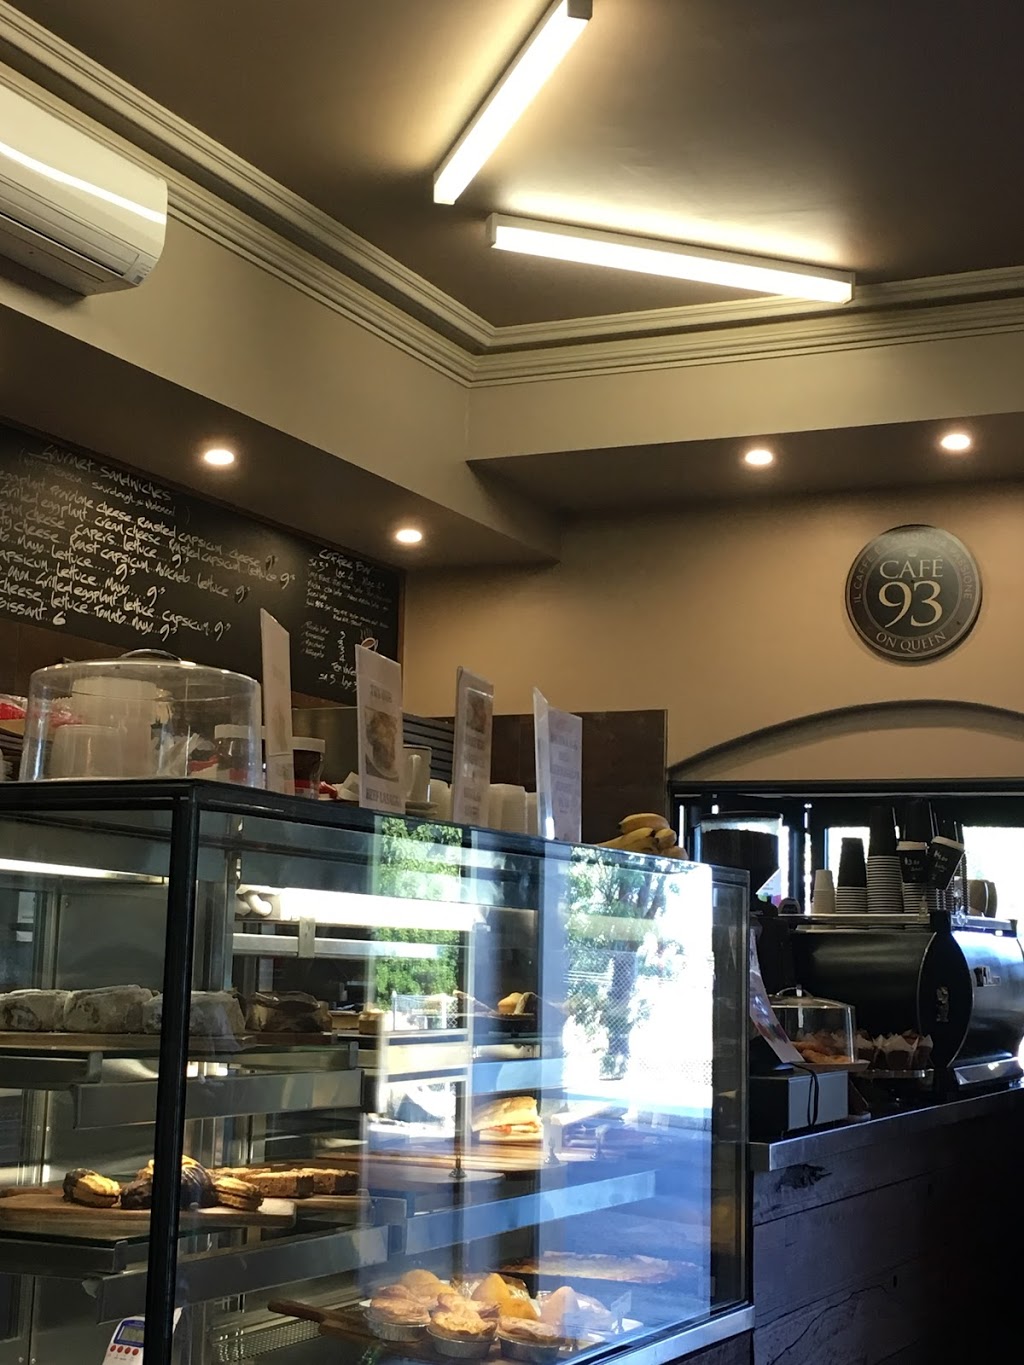 Cafe 93 on Queen | cafe | 93 Queen St, North Strathfield NSW 2137, Australia